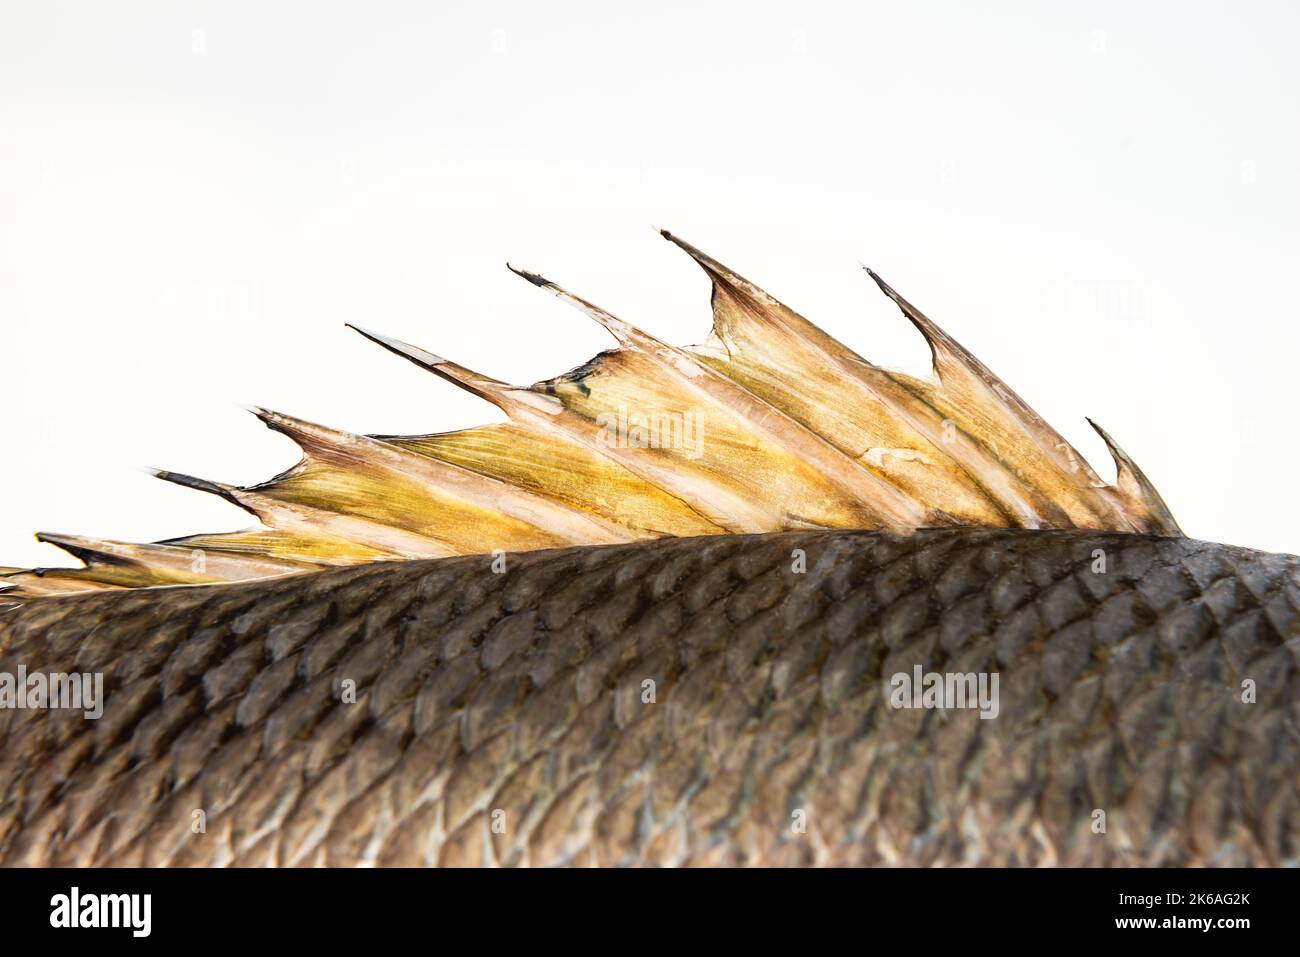 Dorsal fin fish back spine spikes close-up dragon sail mangrove grey snapper Stock Photo